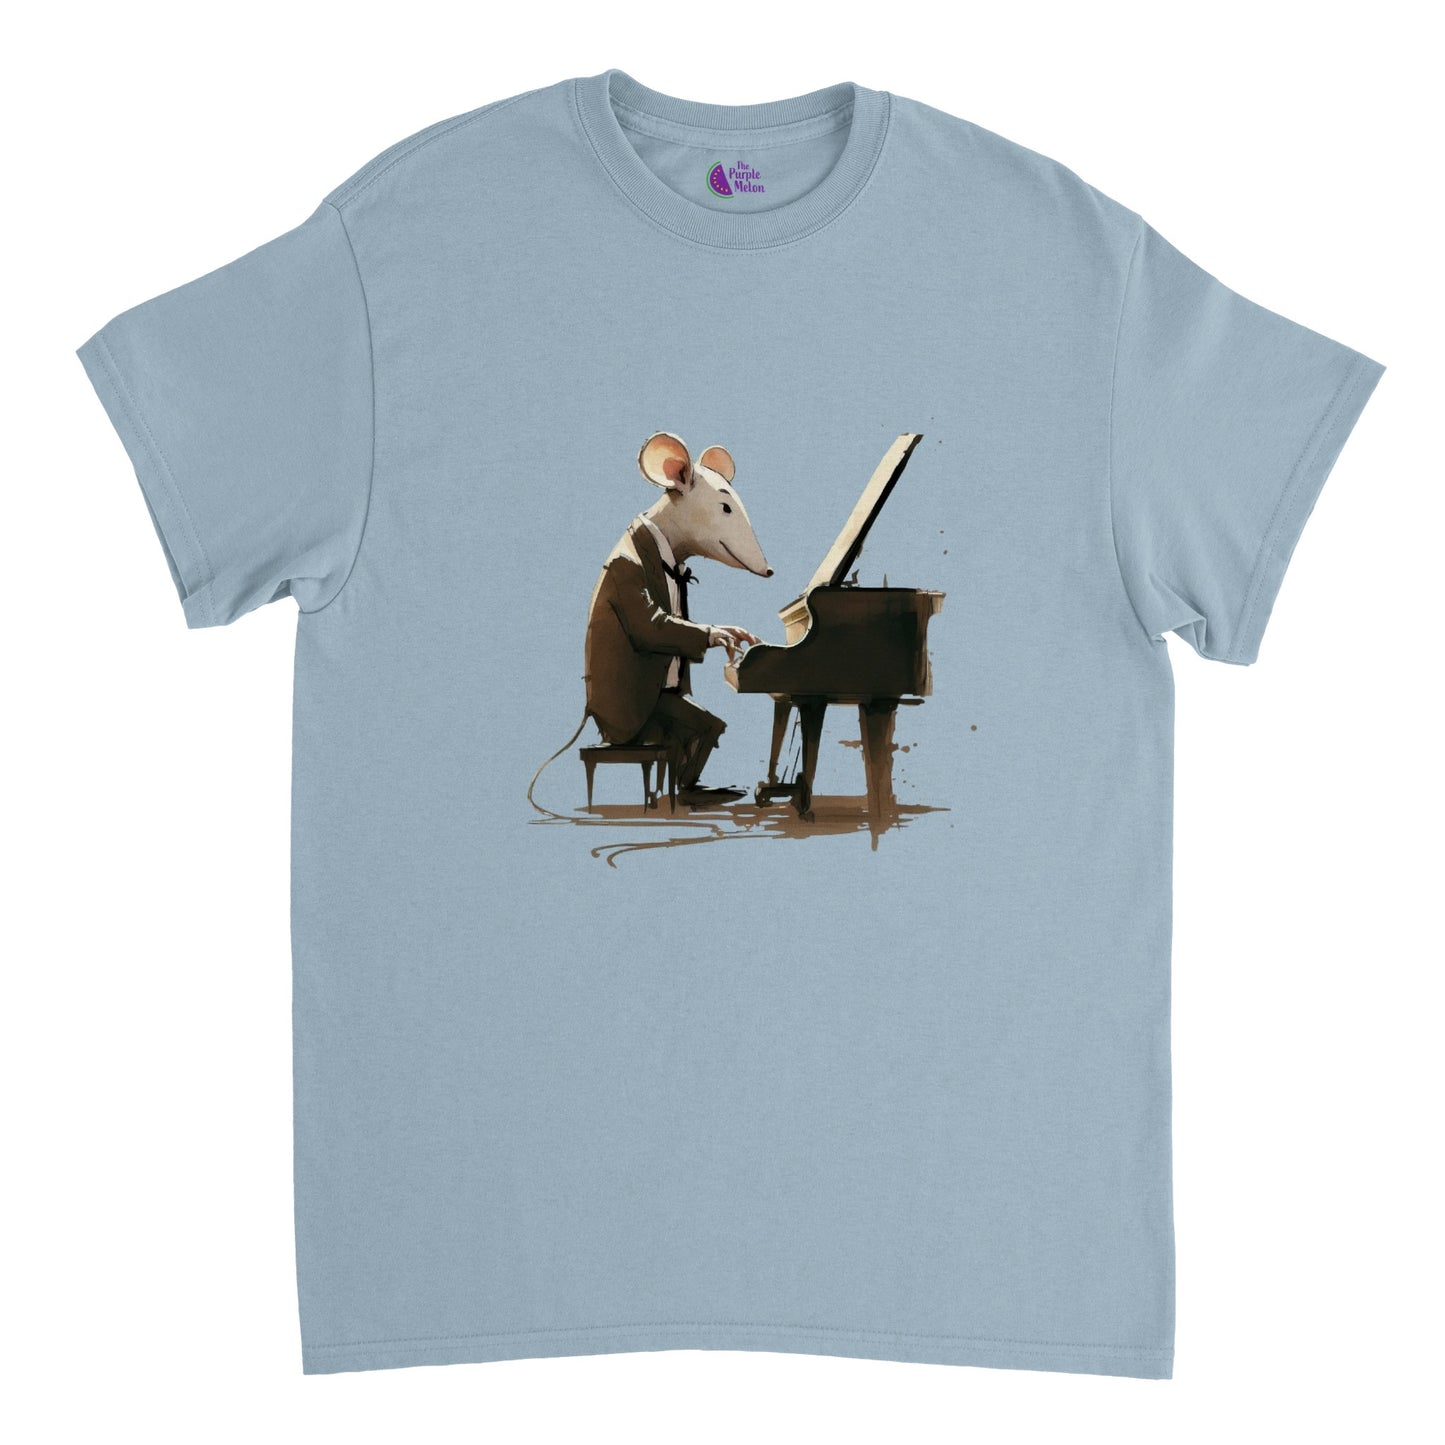 Light blue t-shirt with a mouse playing a piano print